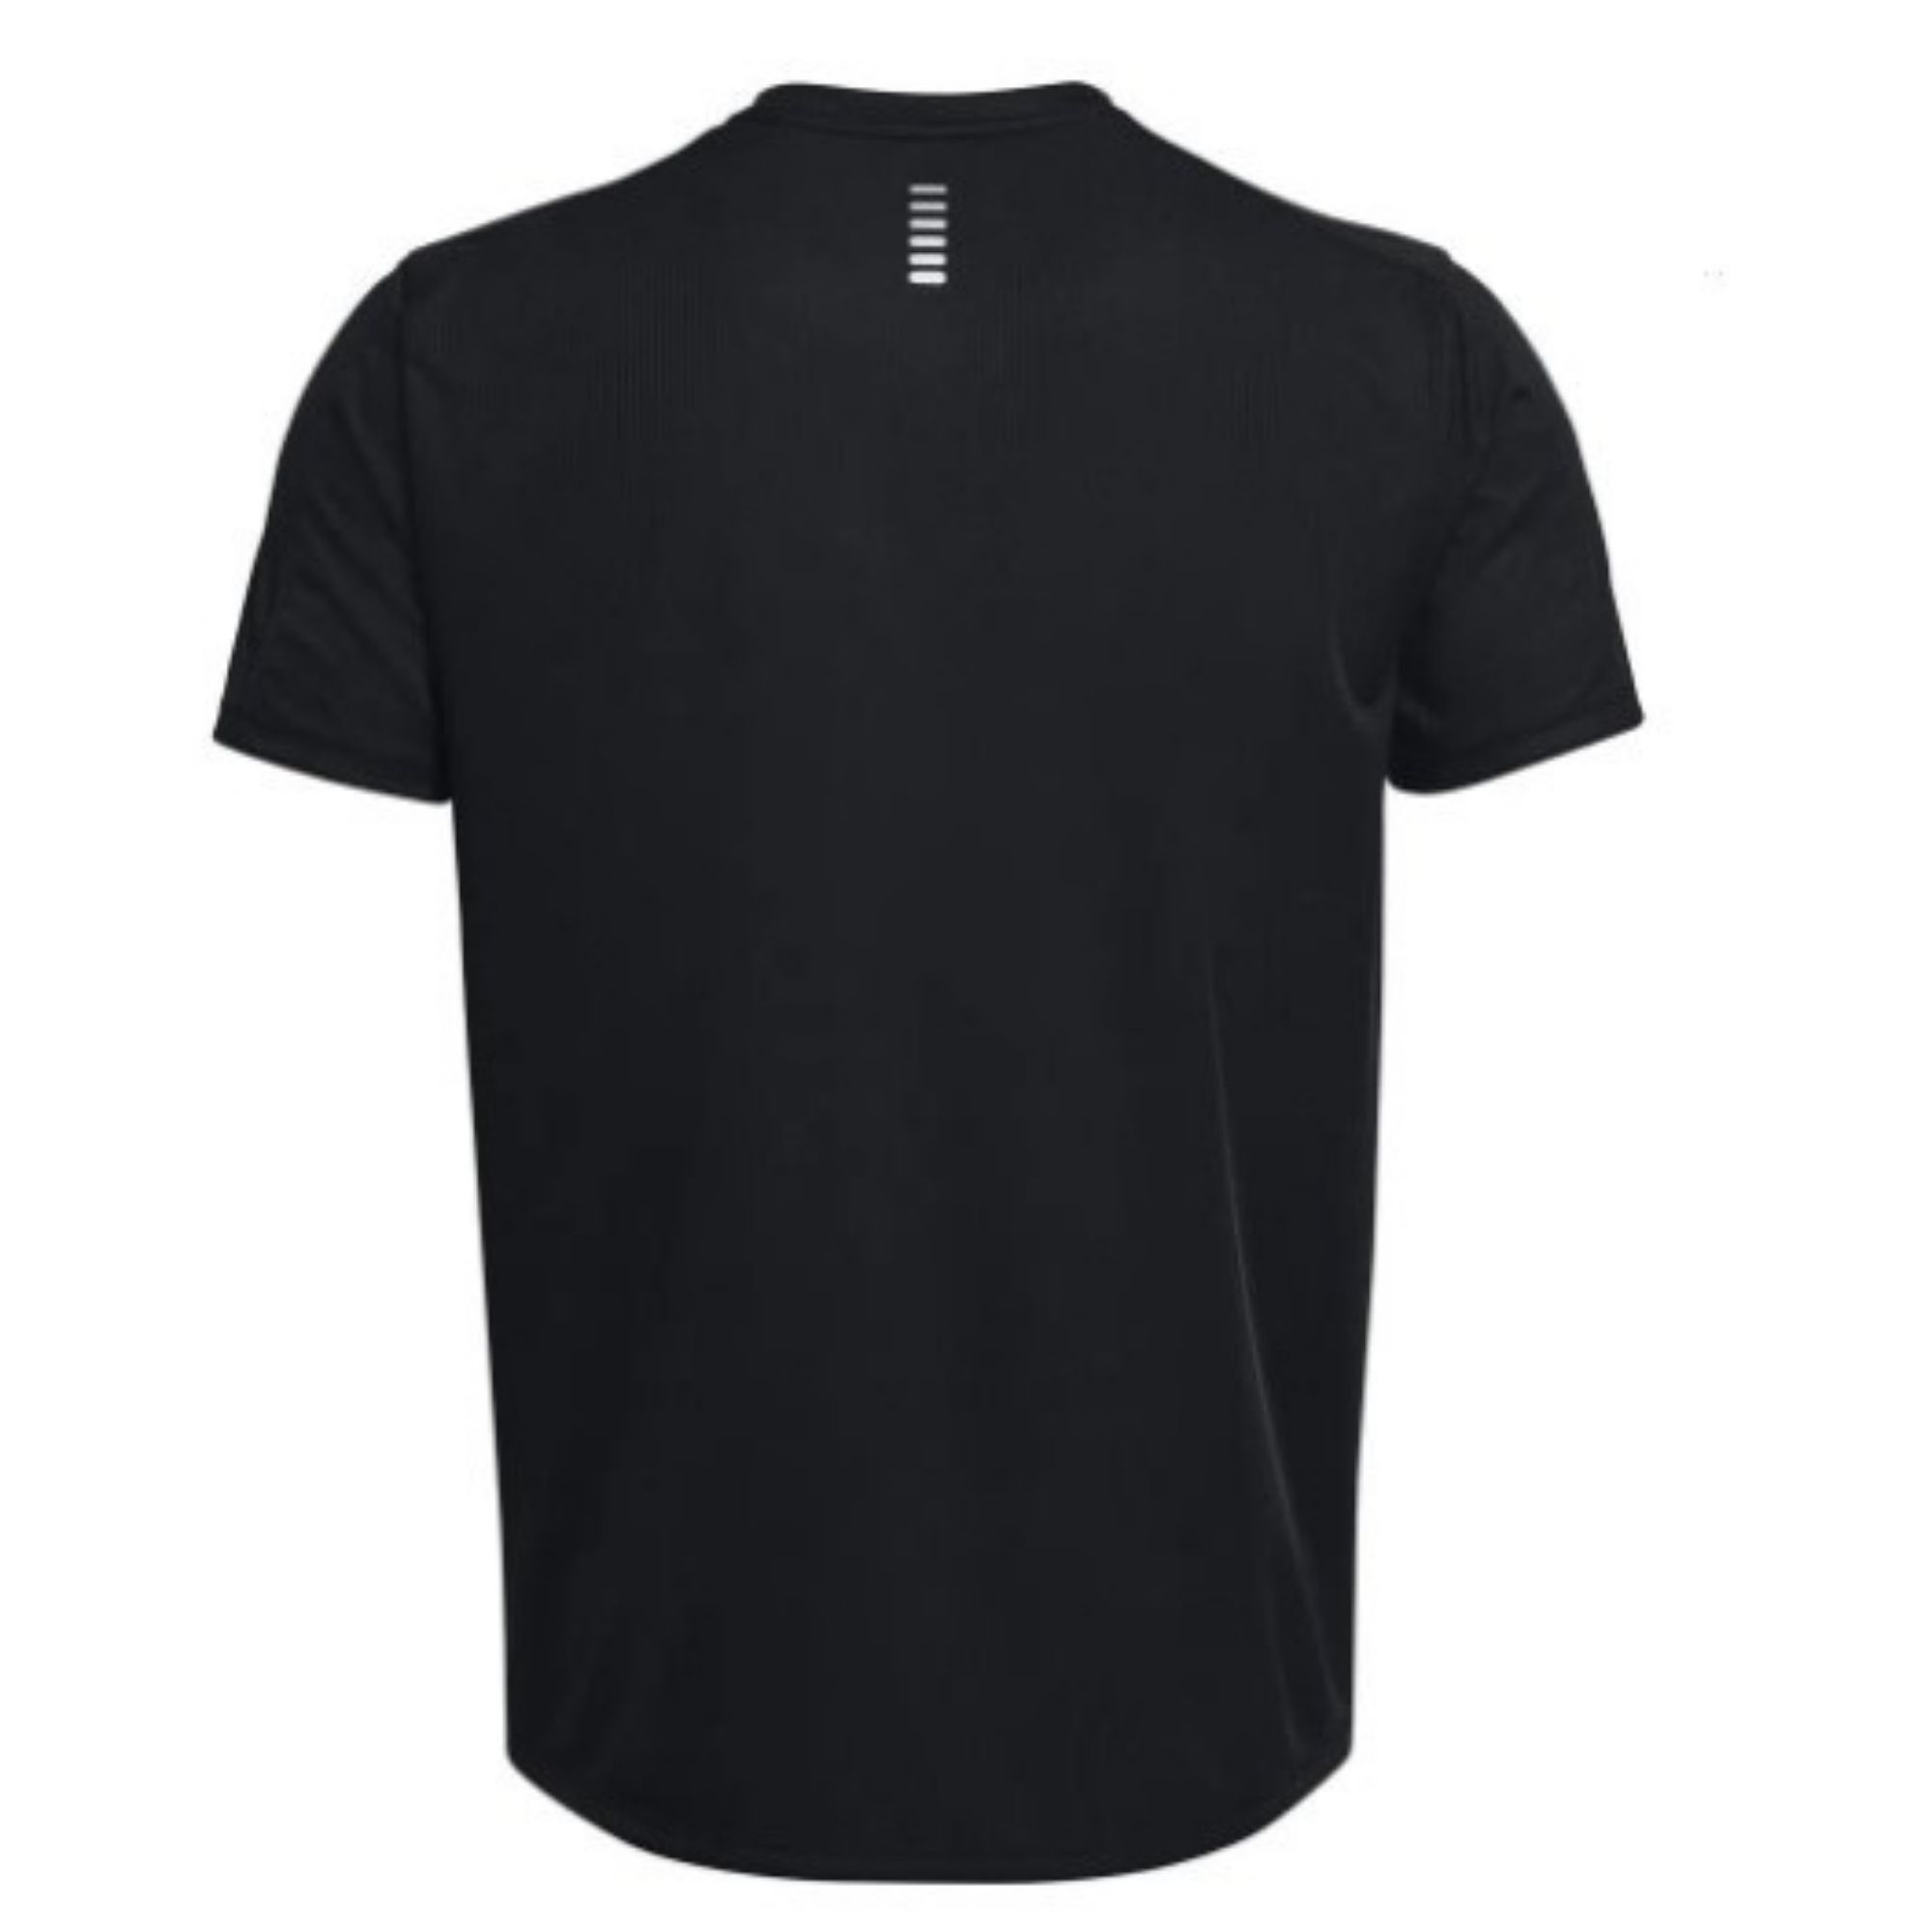 CAMISETA UNDER ARMOUR MASCULINA SPEED STRIDE GRAPHIC SS 1367712